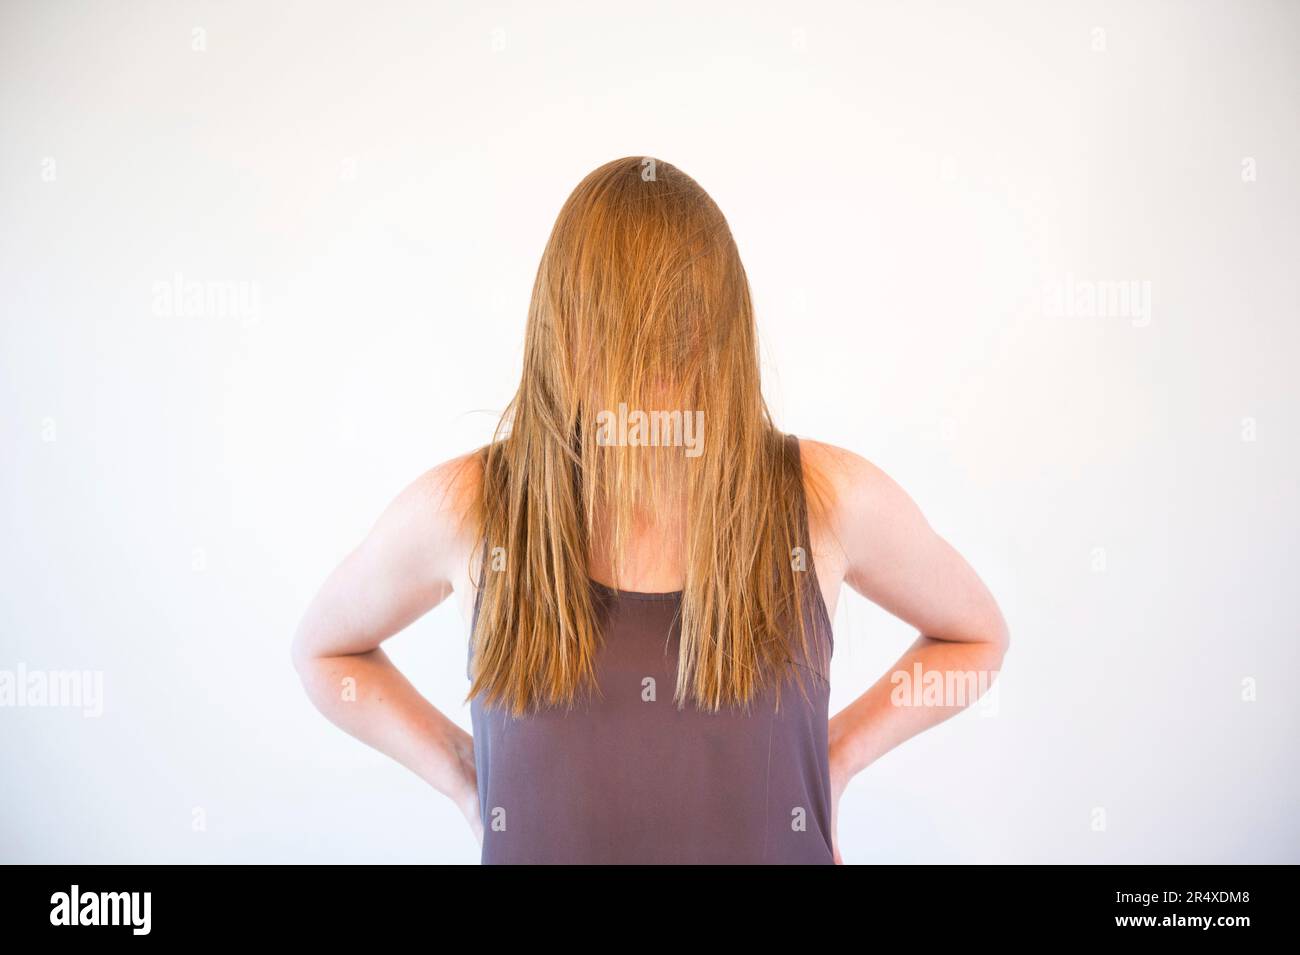 Young woman's long hair obscures her face; Lincoln, Nebraska, United States of America Stock Photo